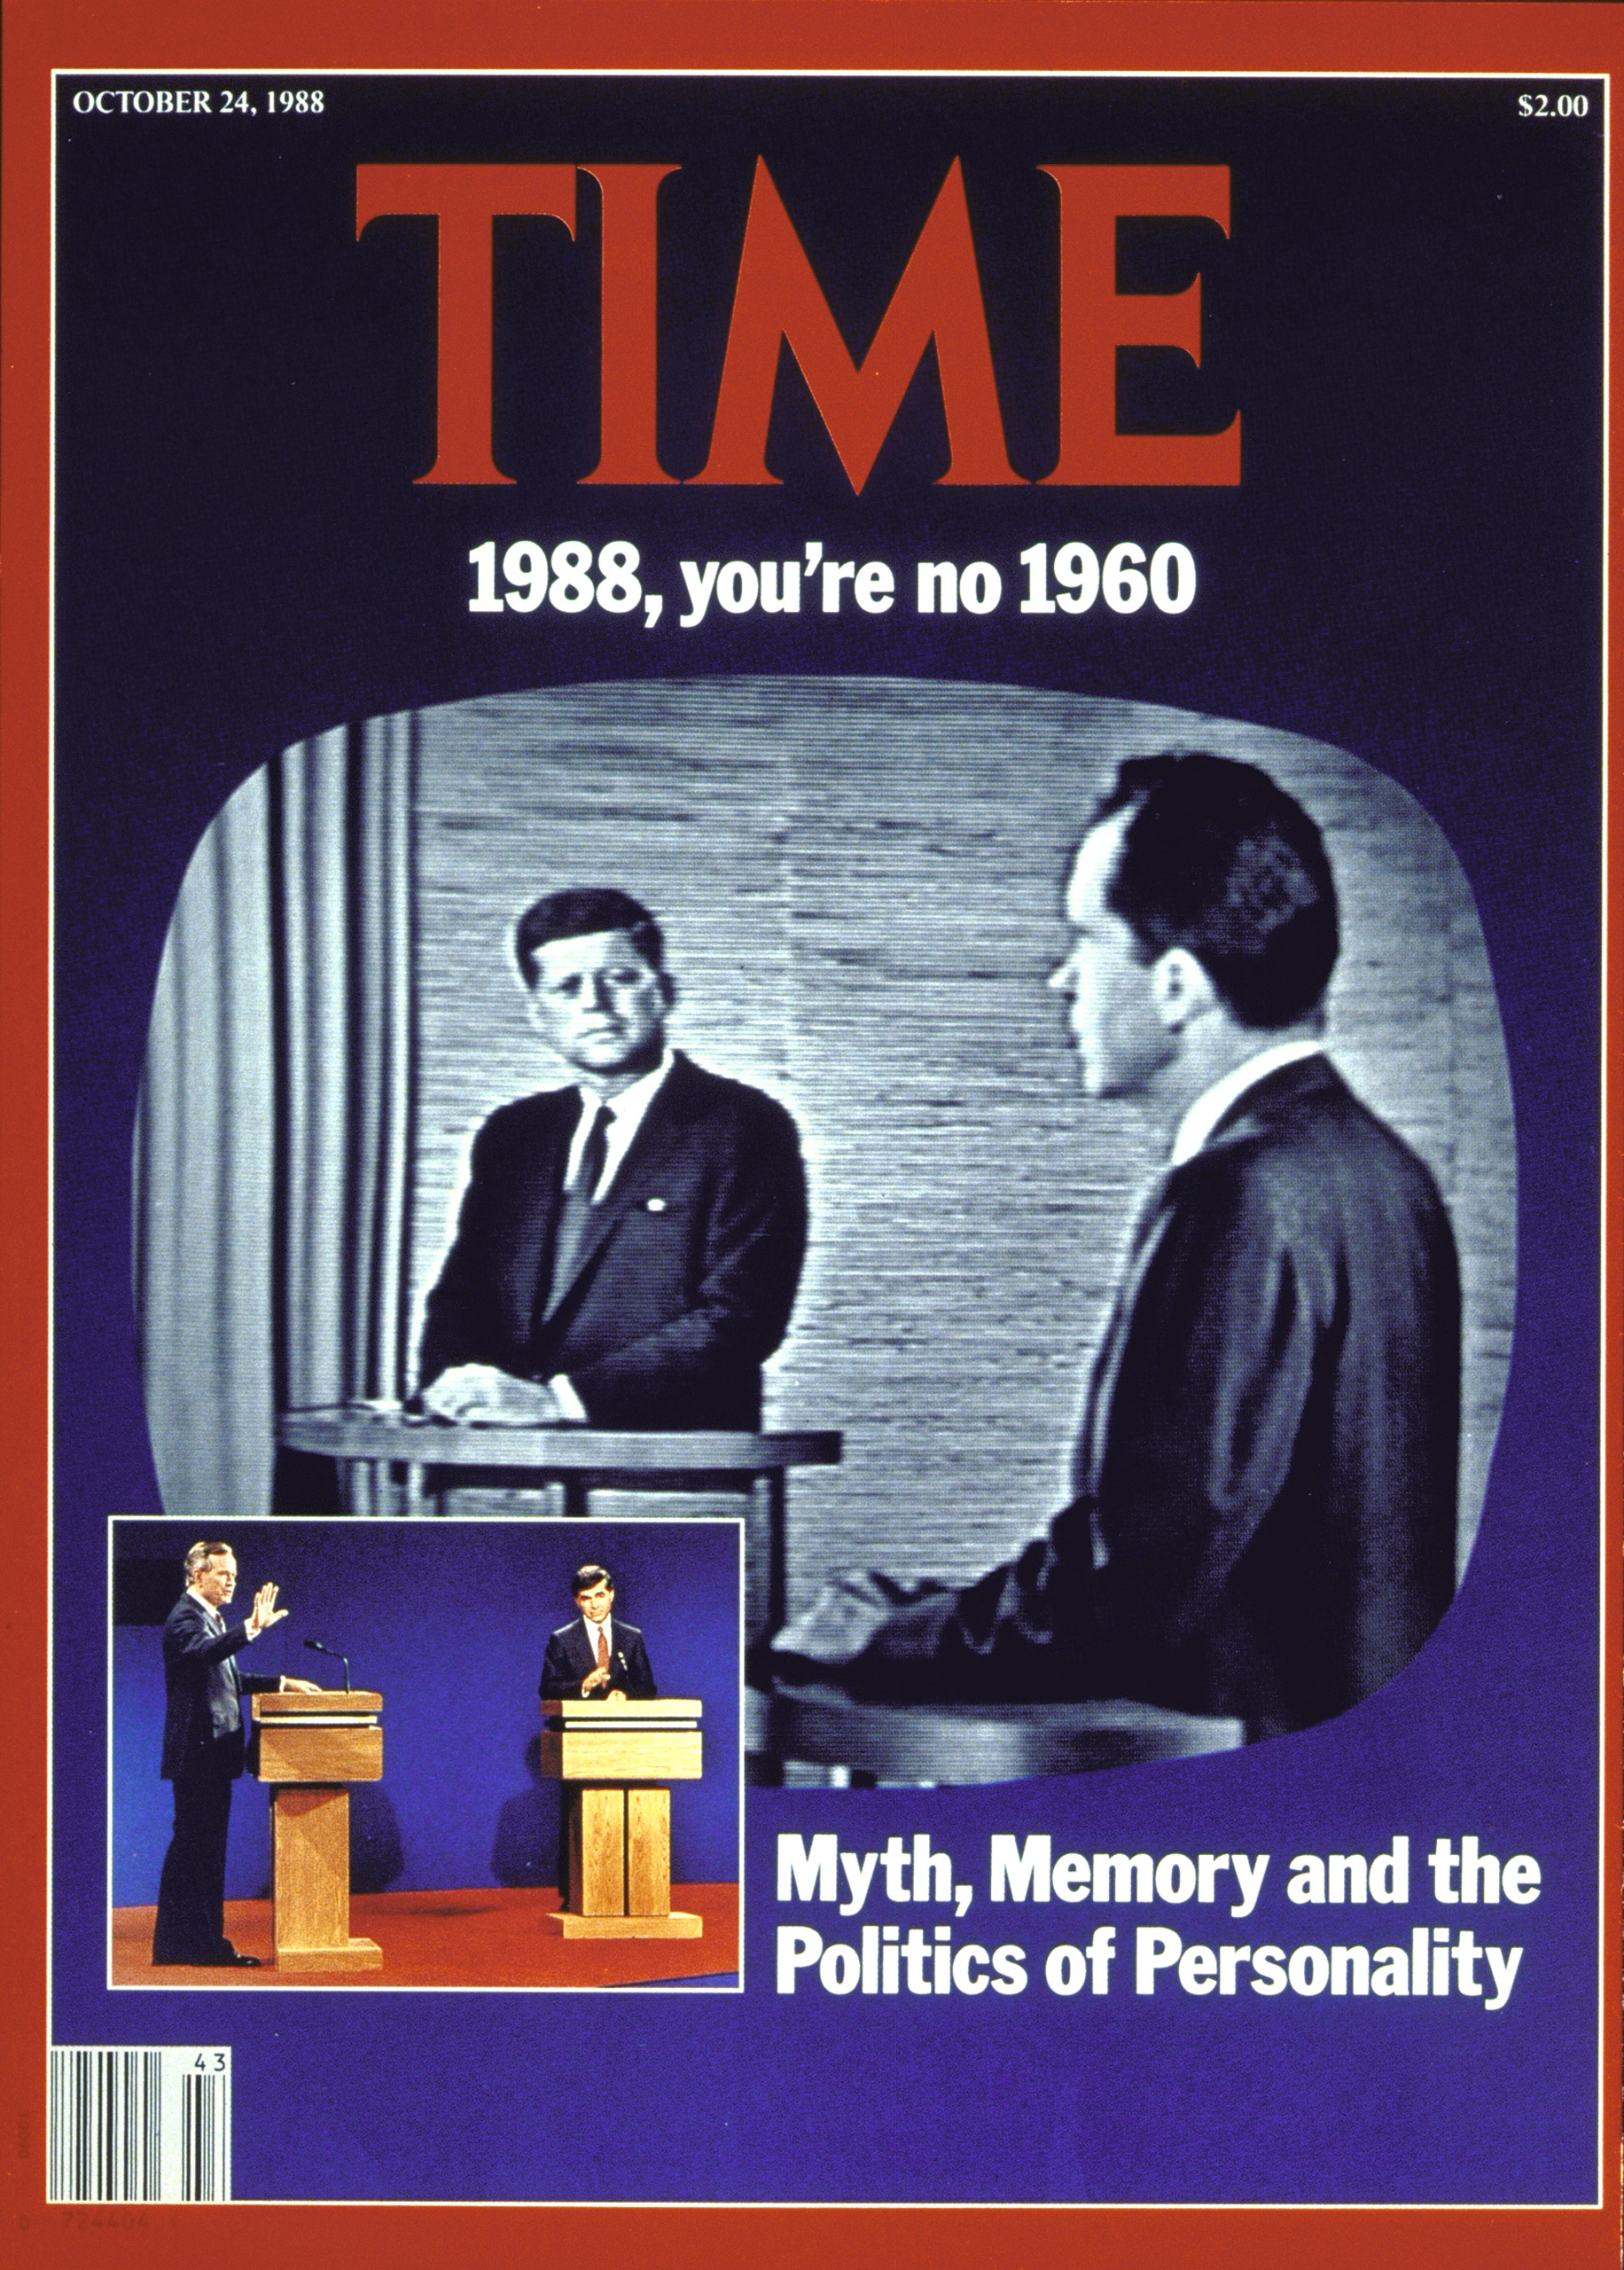 October 24, 1988 cover of TIME magazine. Cover photos: 1960 debate by Paul Schutzer, 1988 debate by Steve Liss.